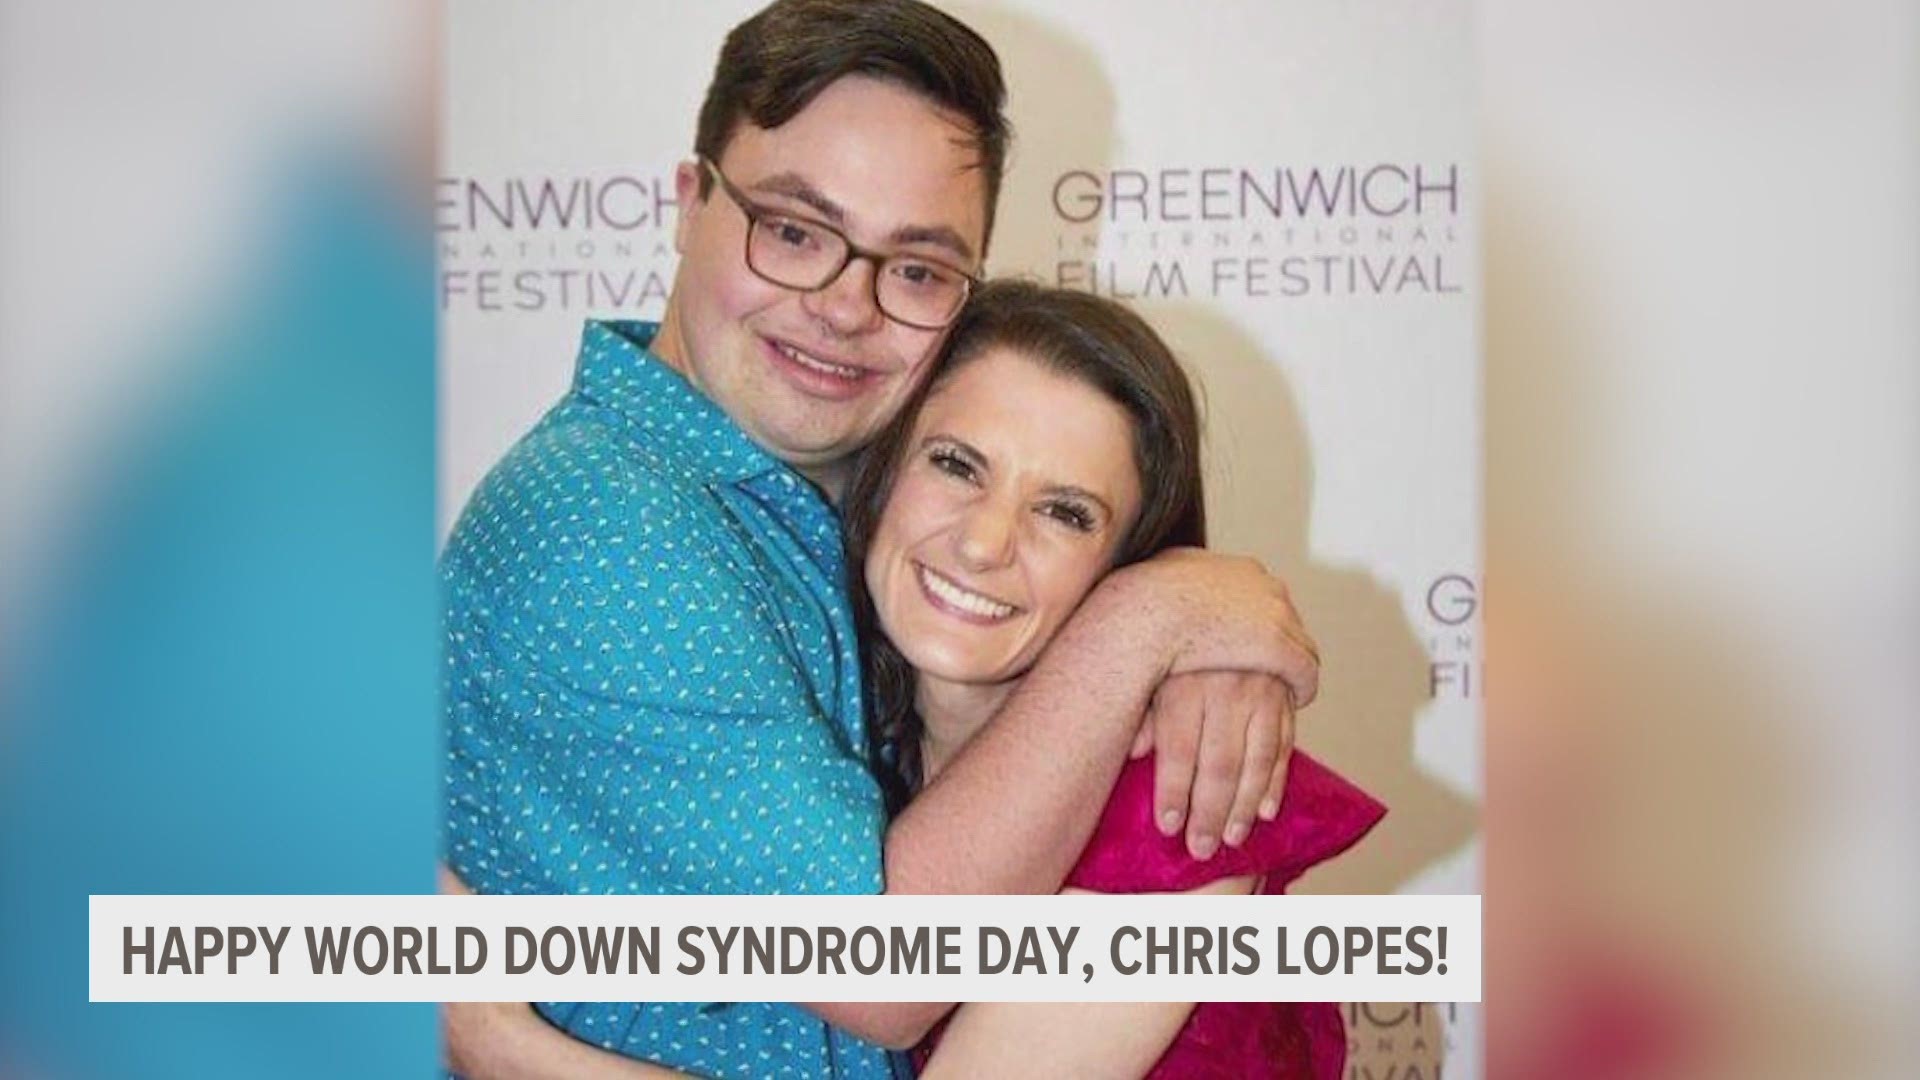 3-21 marks World Down Syndrome Day. Here's how families are celebrating.